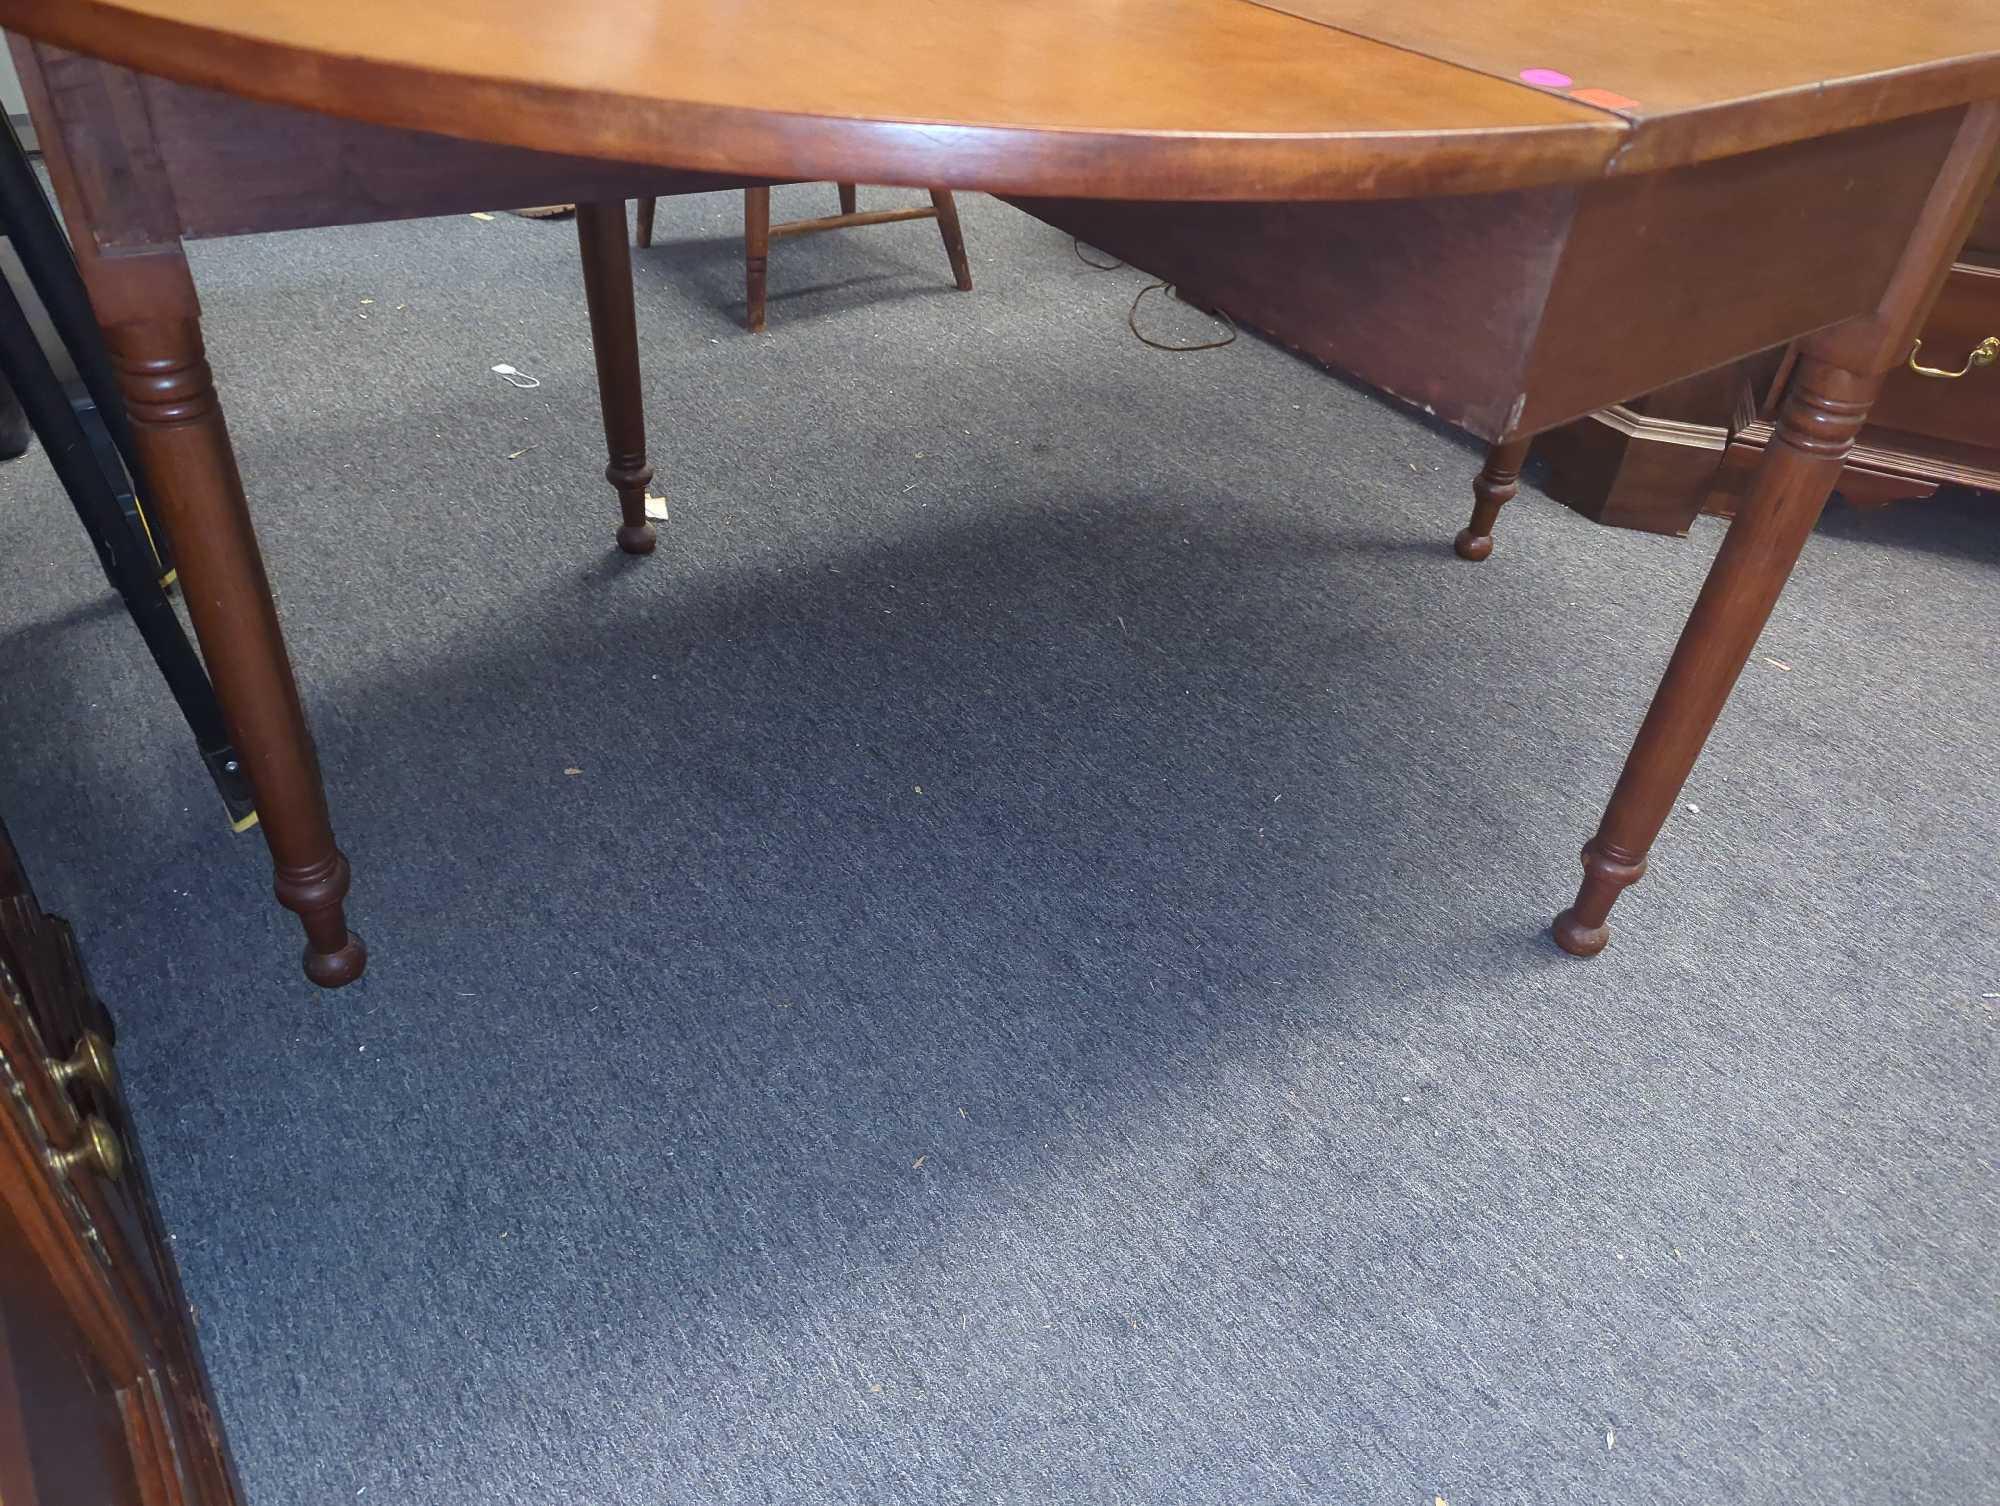 Colonial Style Maple Drop Leaf Dining Table, Legs Move to Hold Up Leafs, Approximate Dimensions